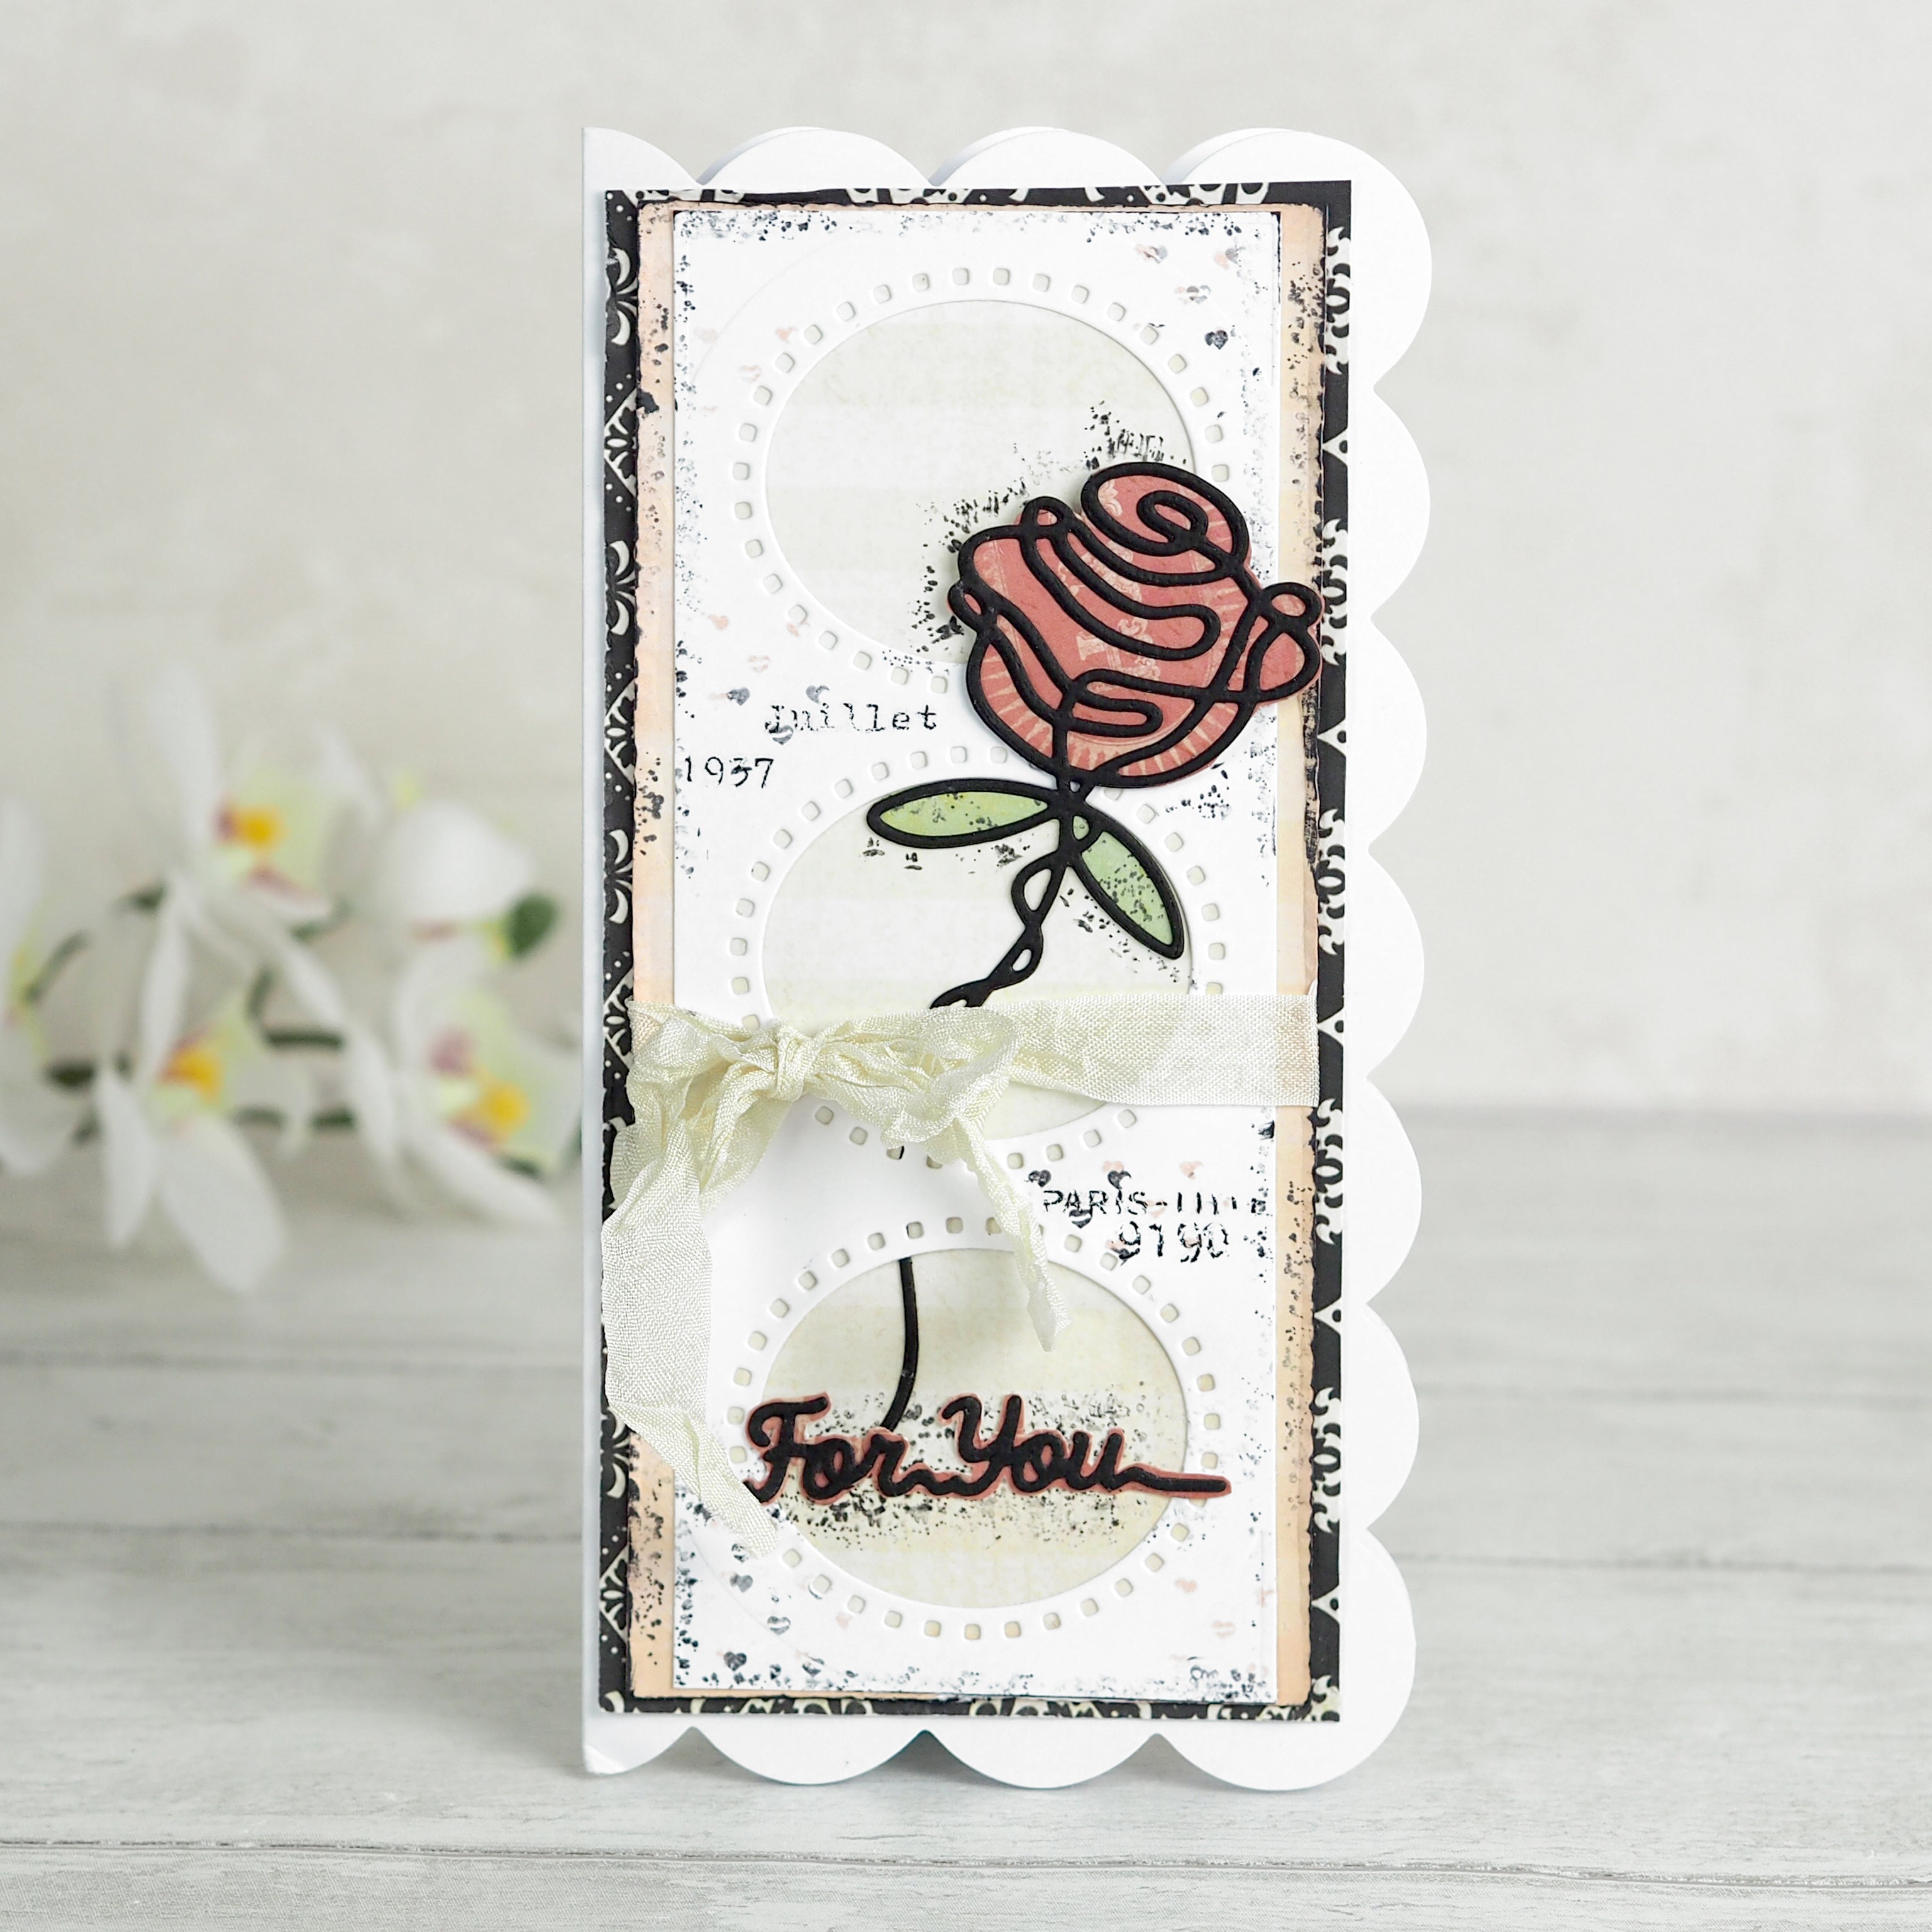 Creative Expressions One-liner Collection Roses Craft Die